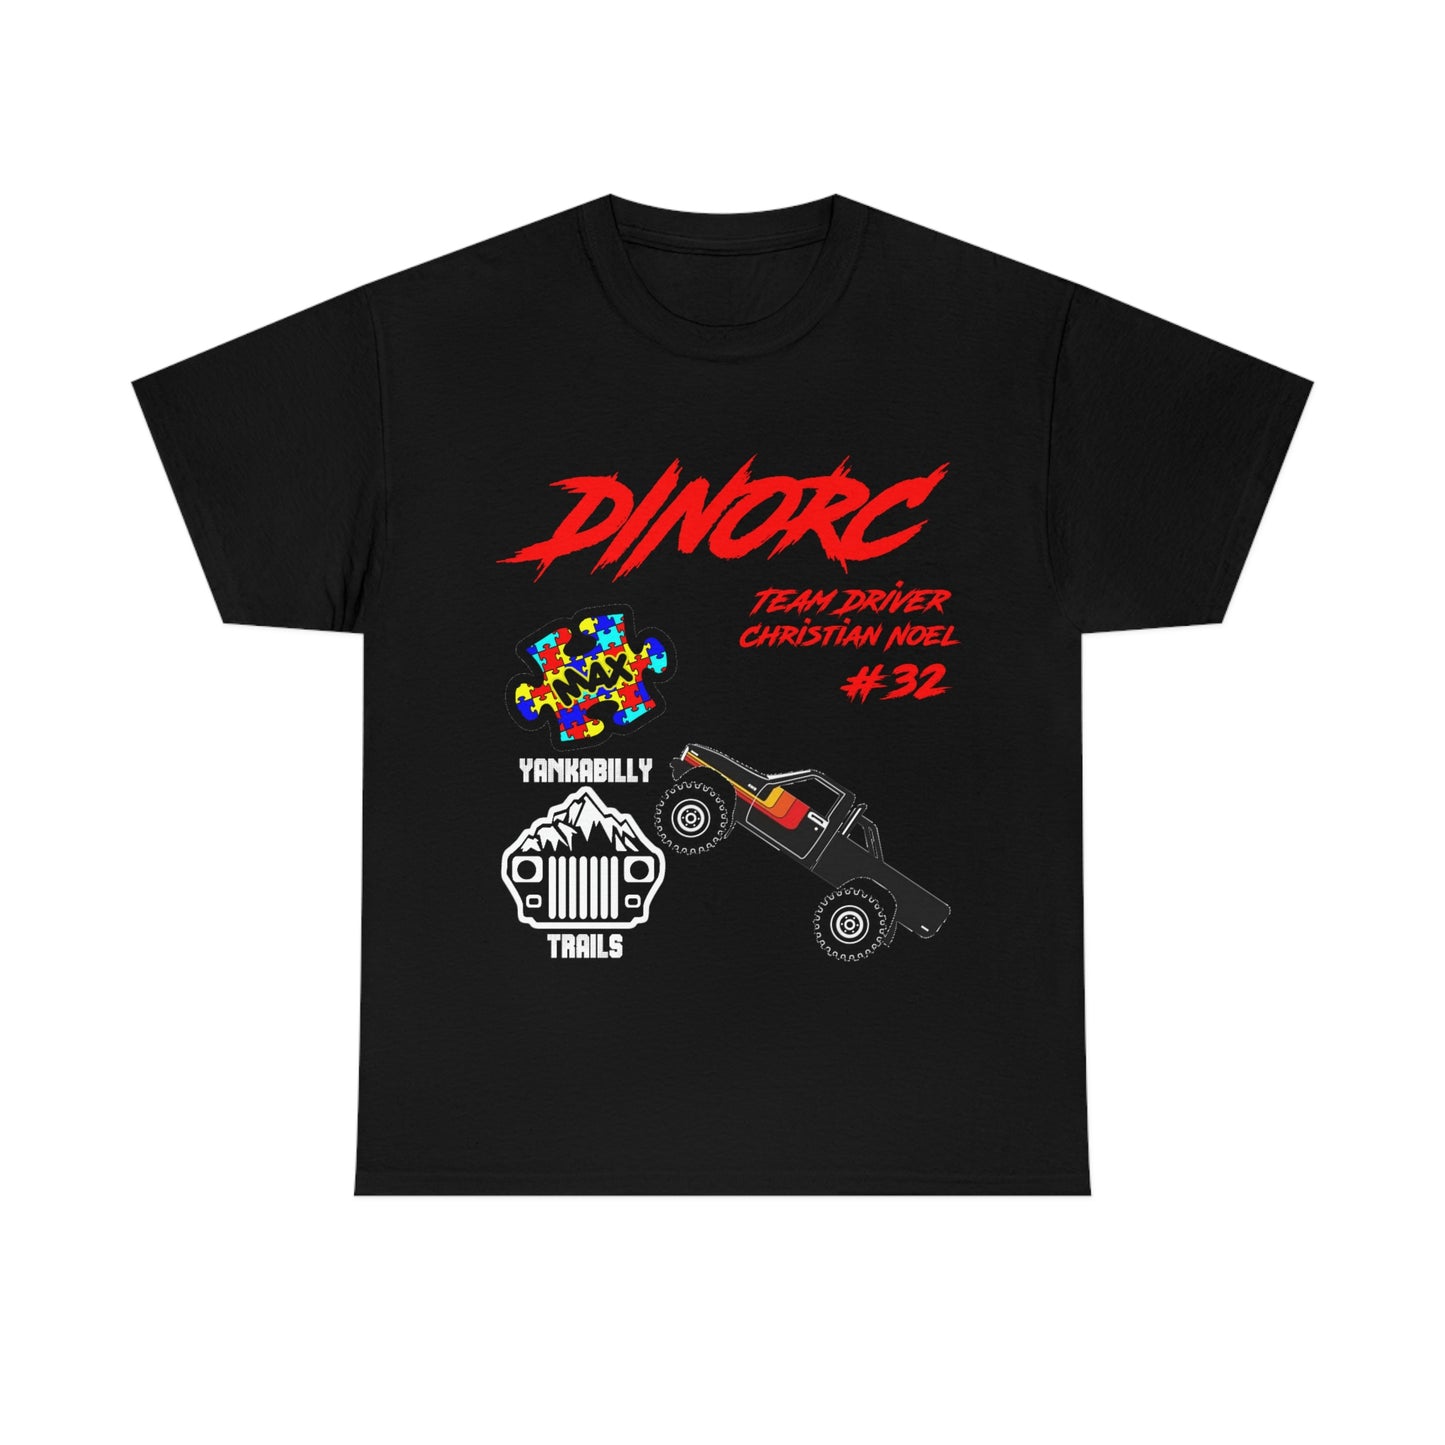 Team Driver Christian Noel truck logo Front and Back DinoRc Logo T-Shirt S-5x 5 colors